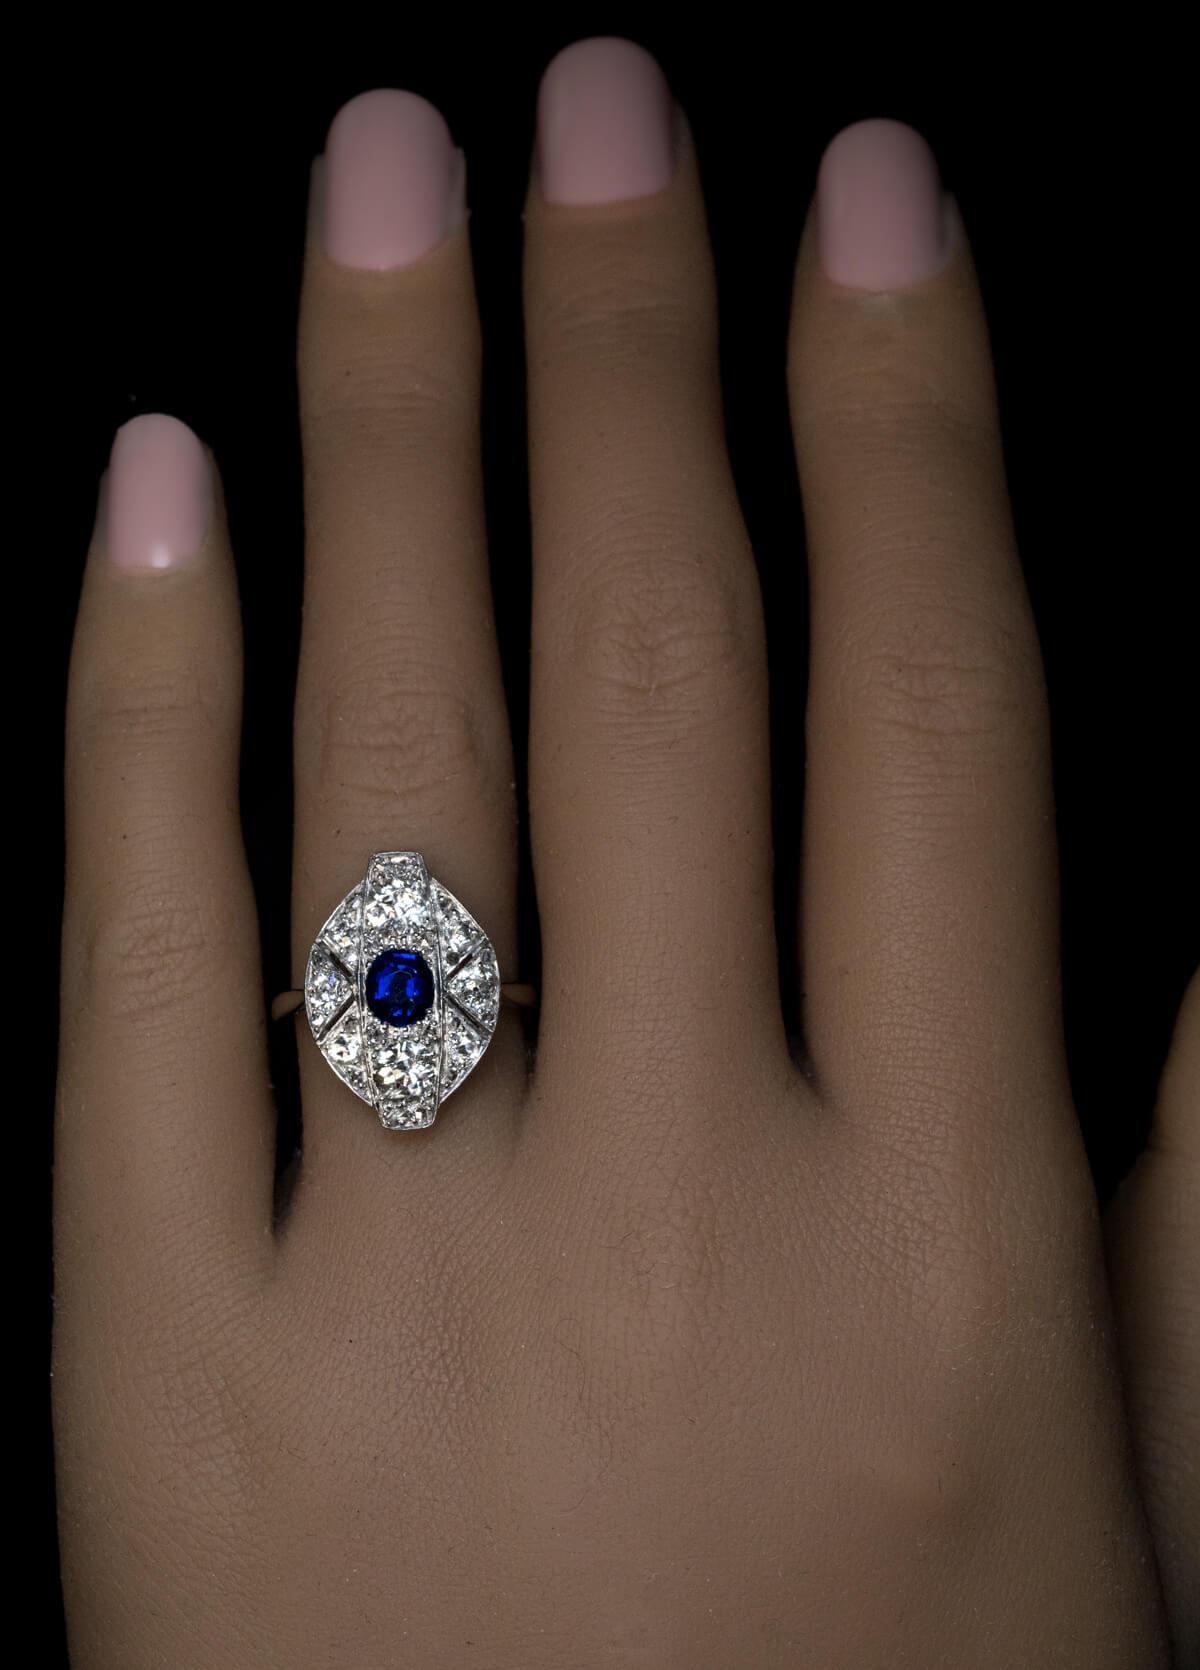 Circa 1925  This distinctly Art Deco ring is crafted in white 18K gold. It is centered with an oval royal blue sapphire (approximately 0.67 ct) framed by bright white old European cut diamonds (G-H color, VS2 average clarity), accented by small rose